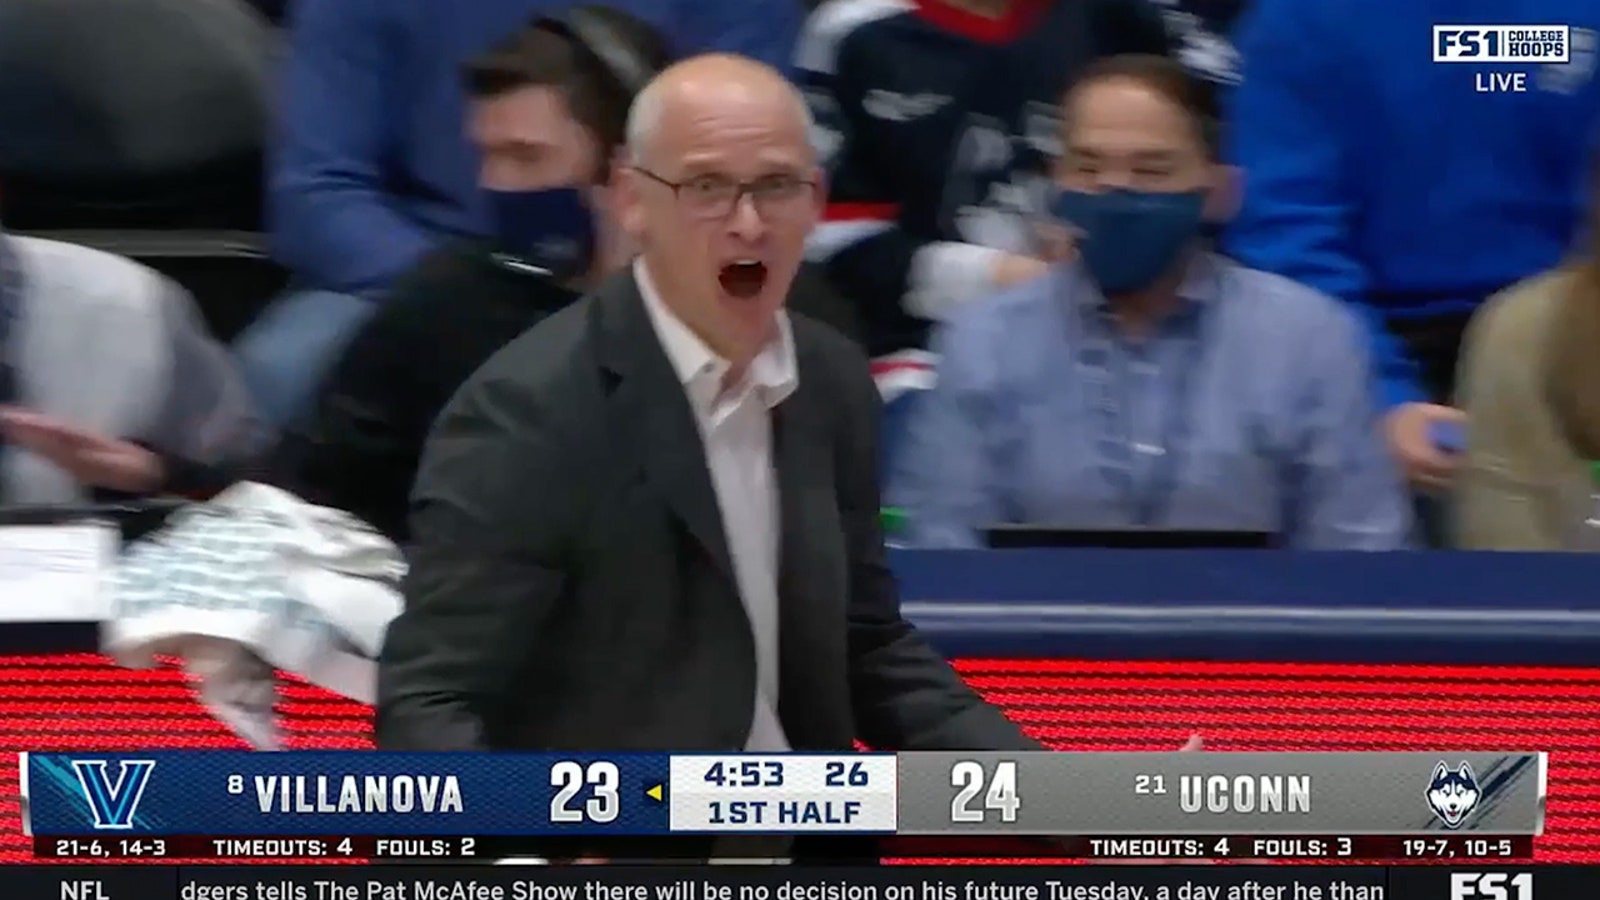 UConn's Dan Hurley is ejected